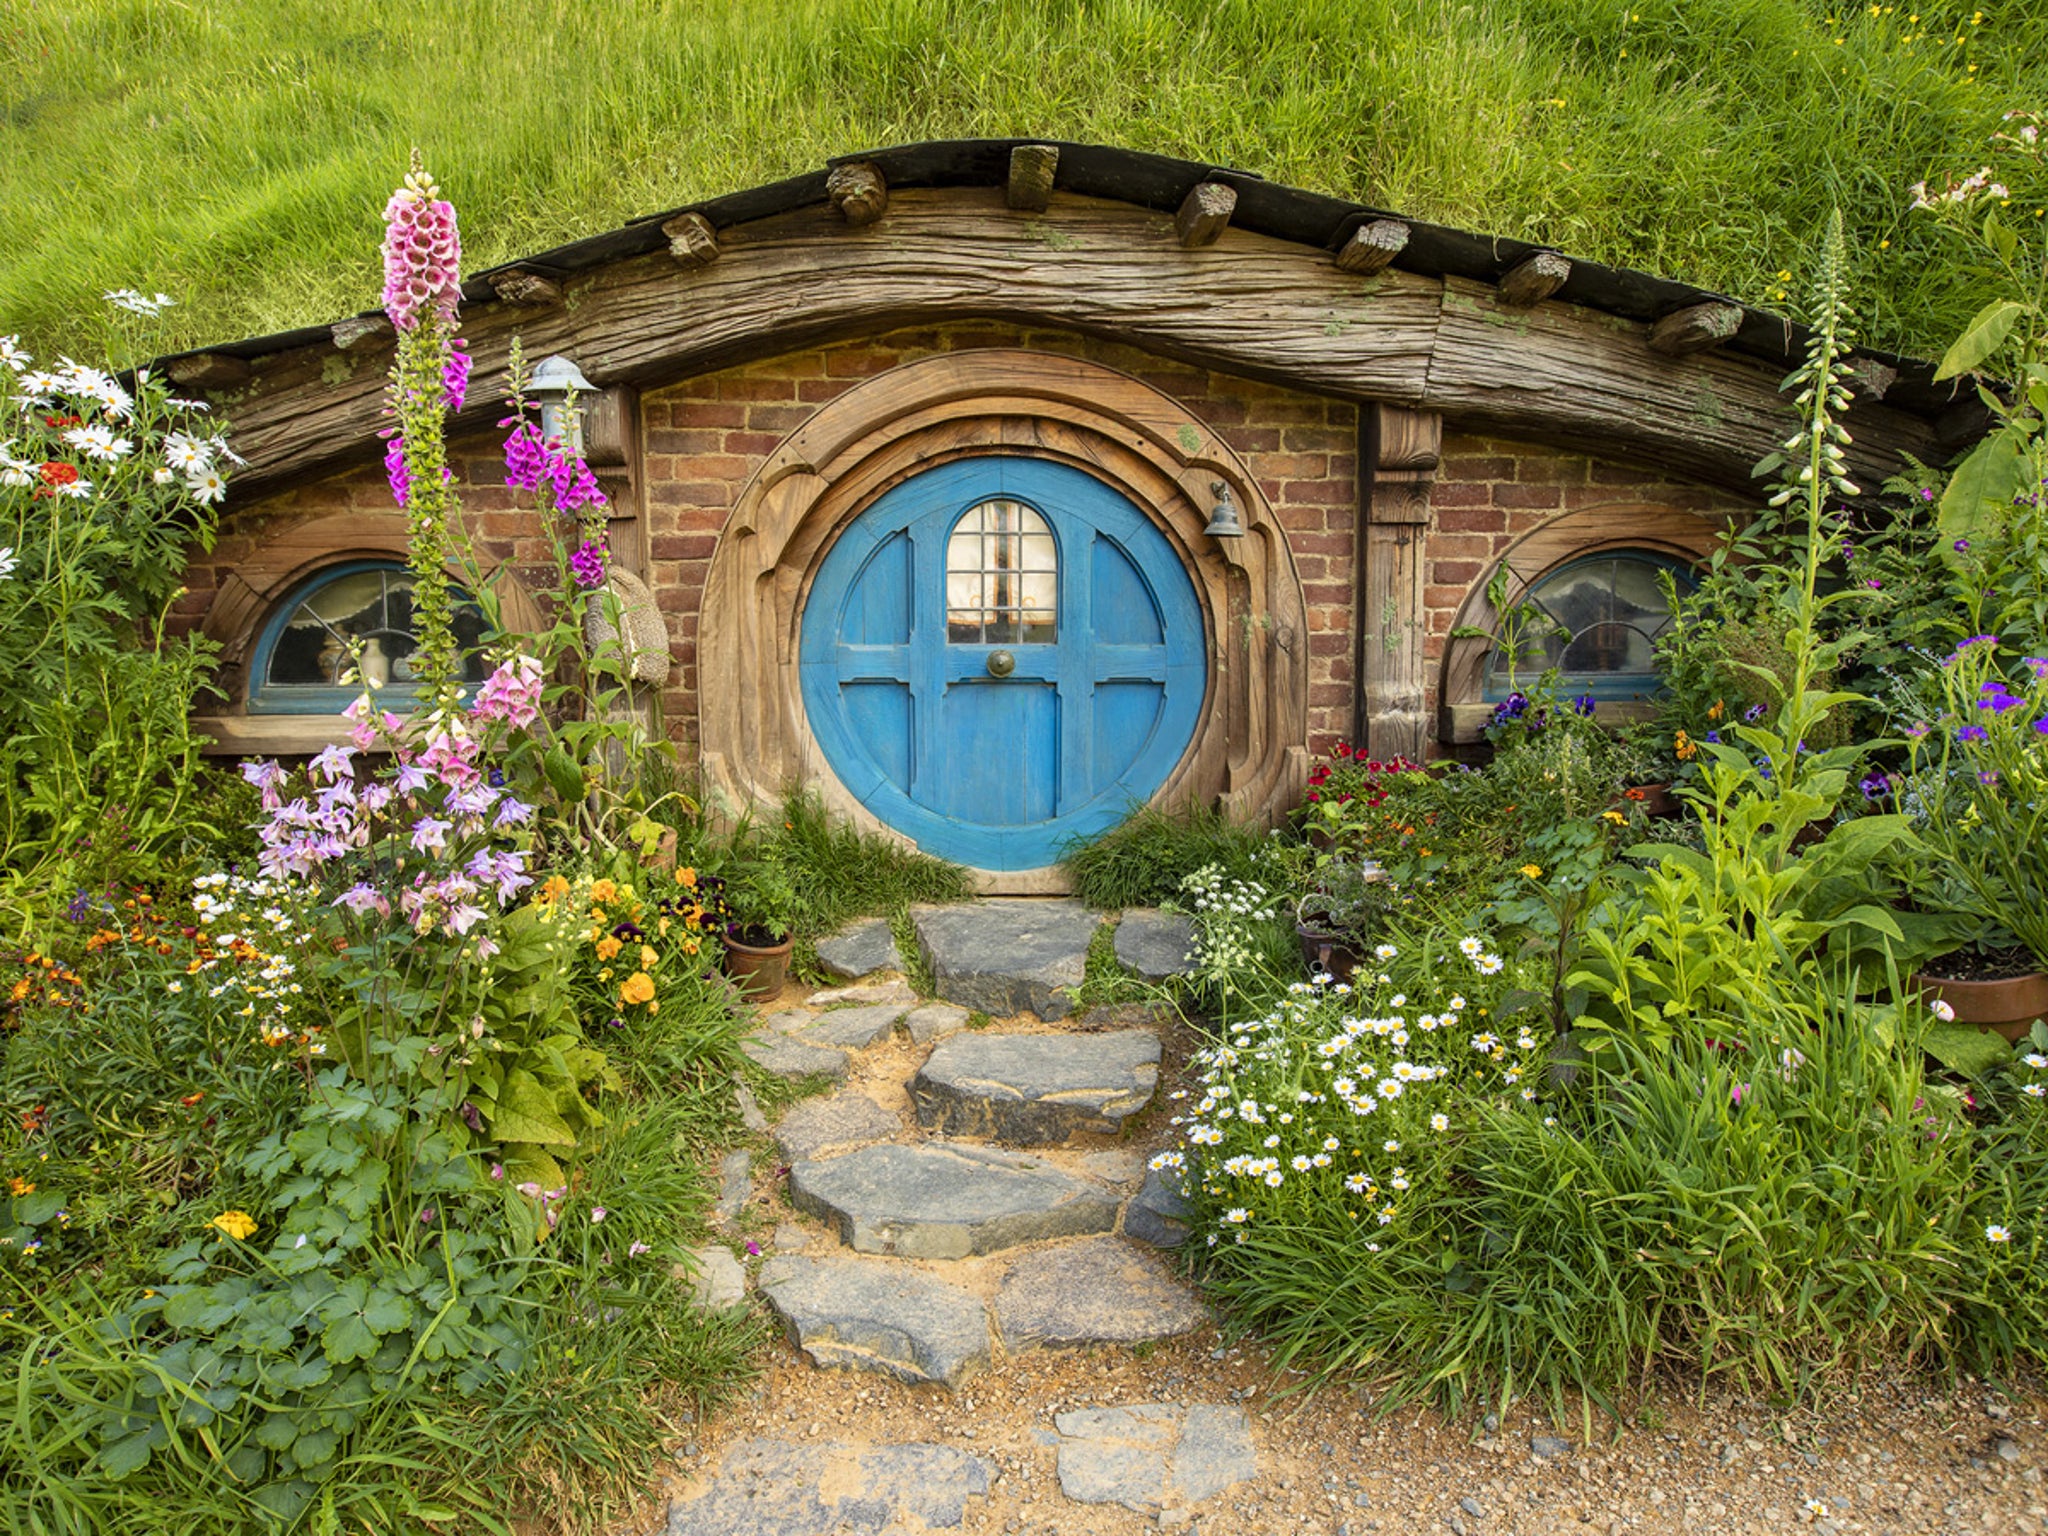 Ezel rok anker Lord Of The Rings' Movie Set Listed On Airbnb For 2-Night Stay